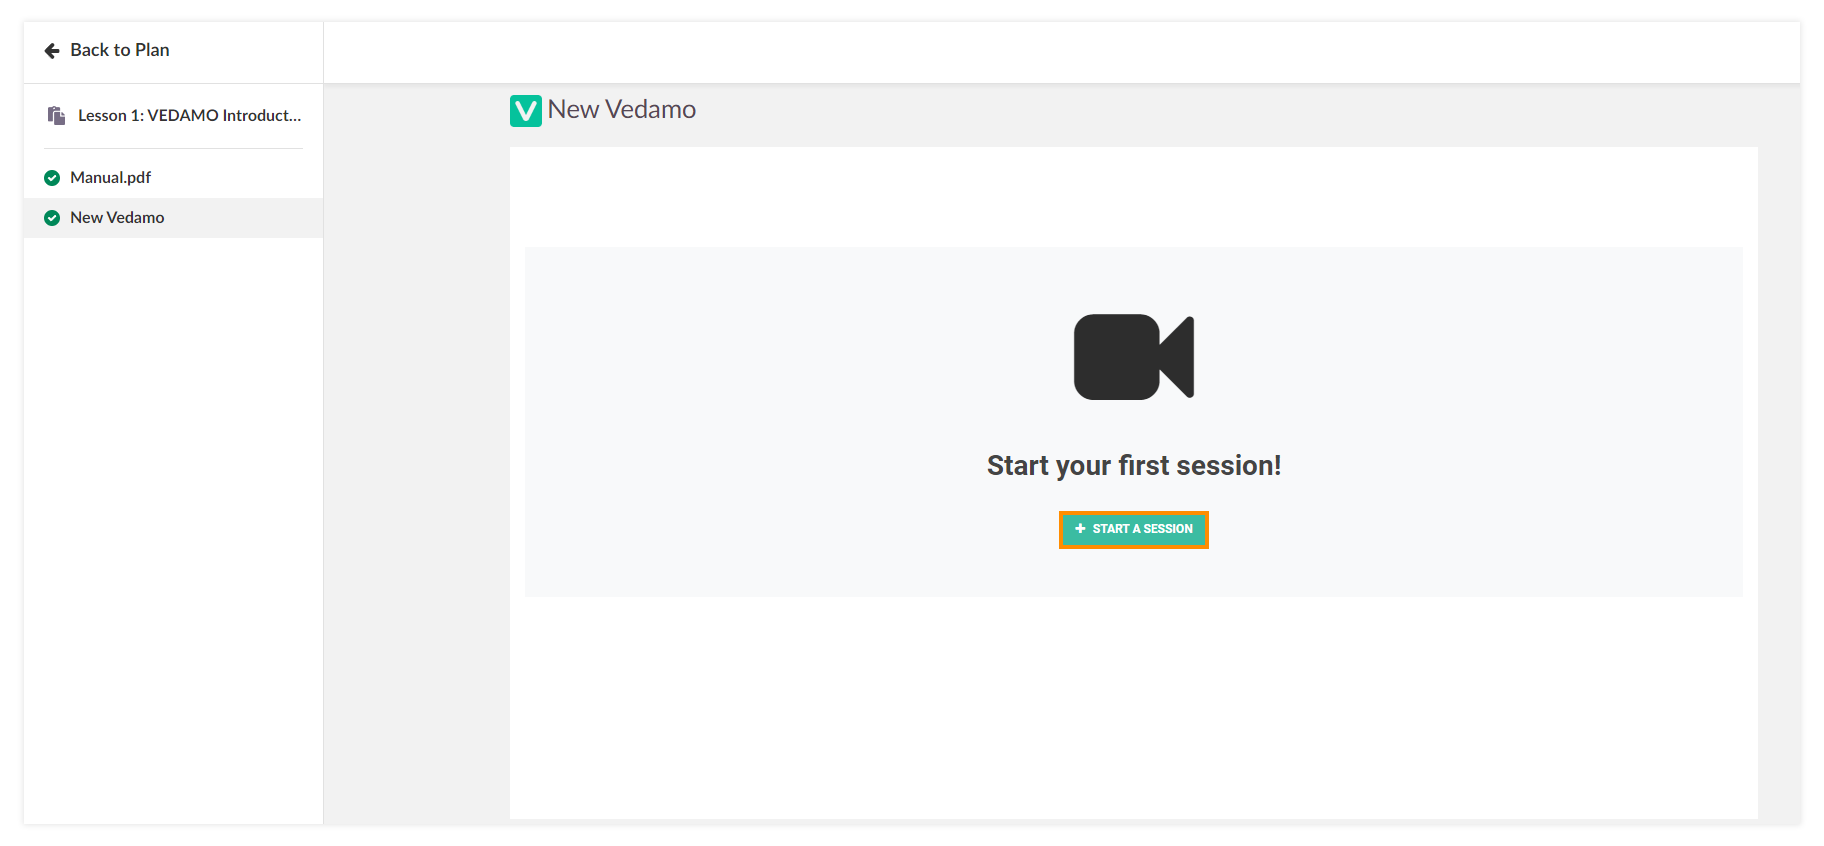 How to use VEDAMO Virtual Classroom as a Teacher in itslearning: Press the + Start a session button